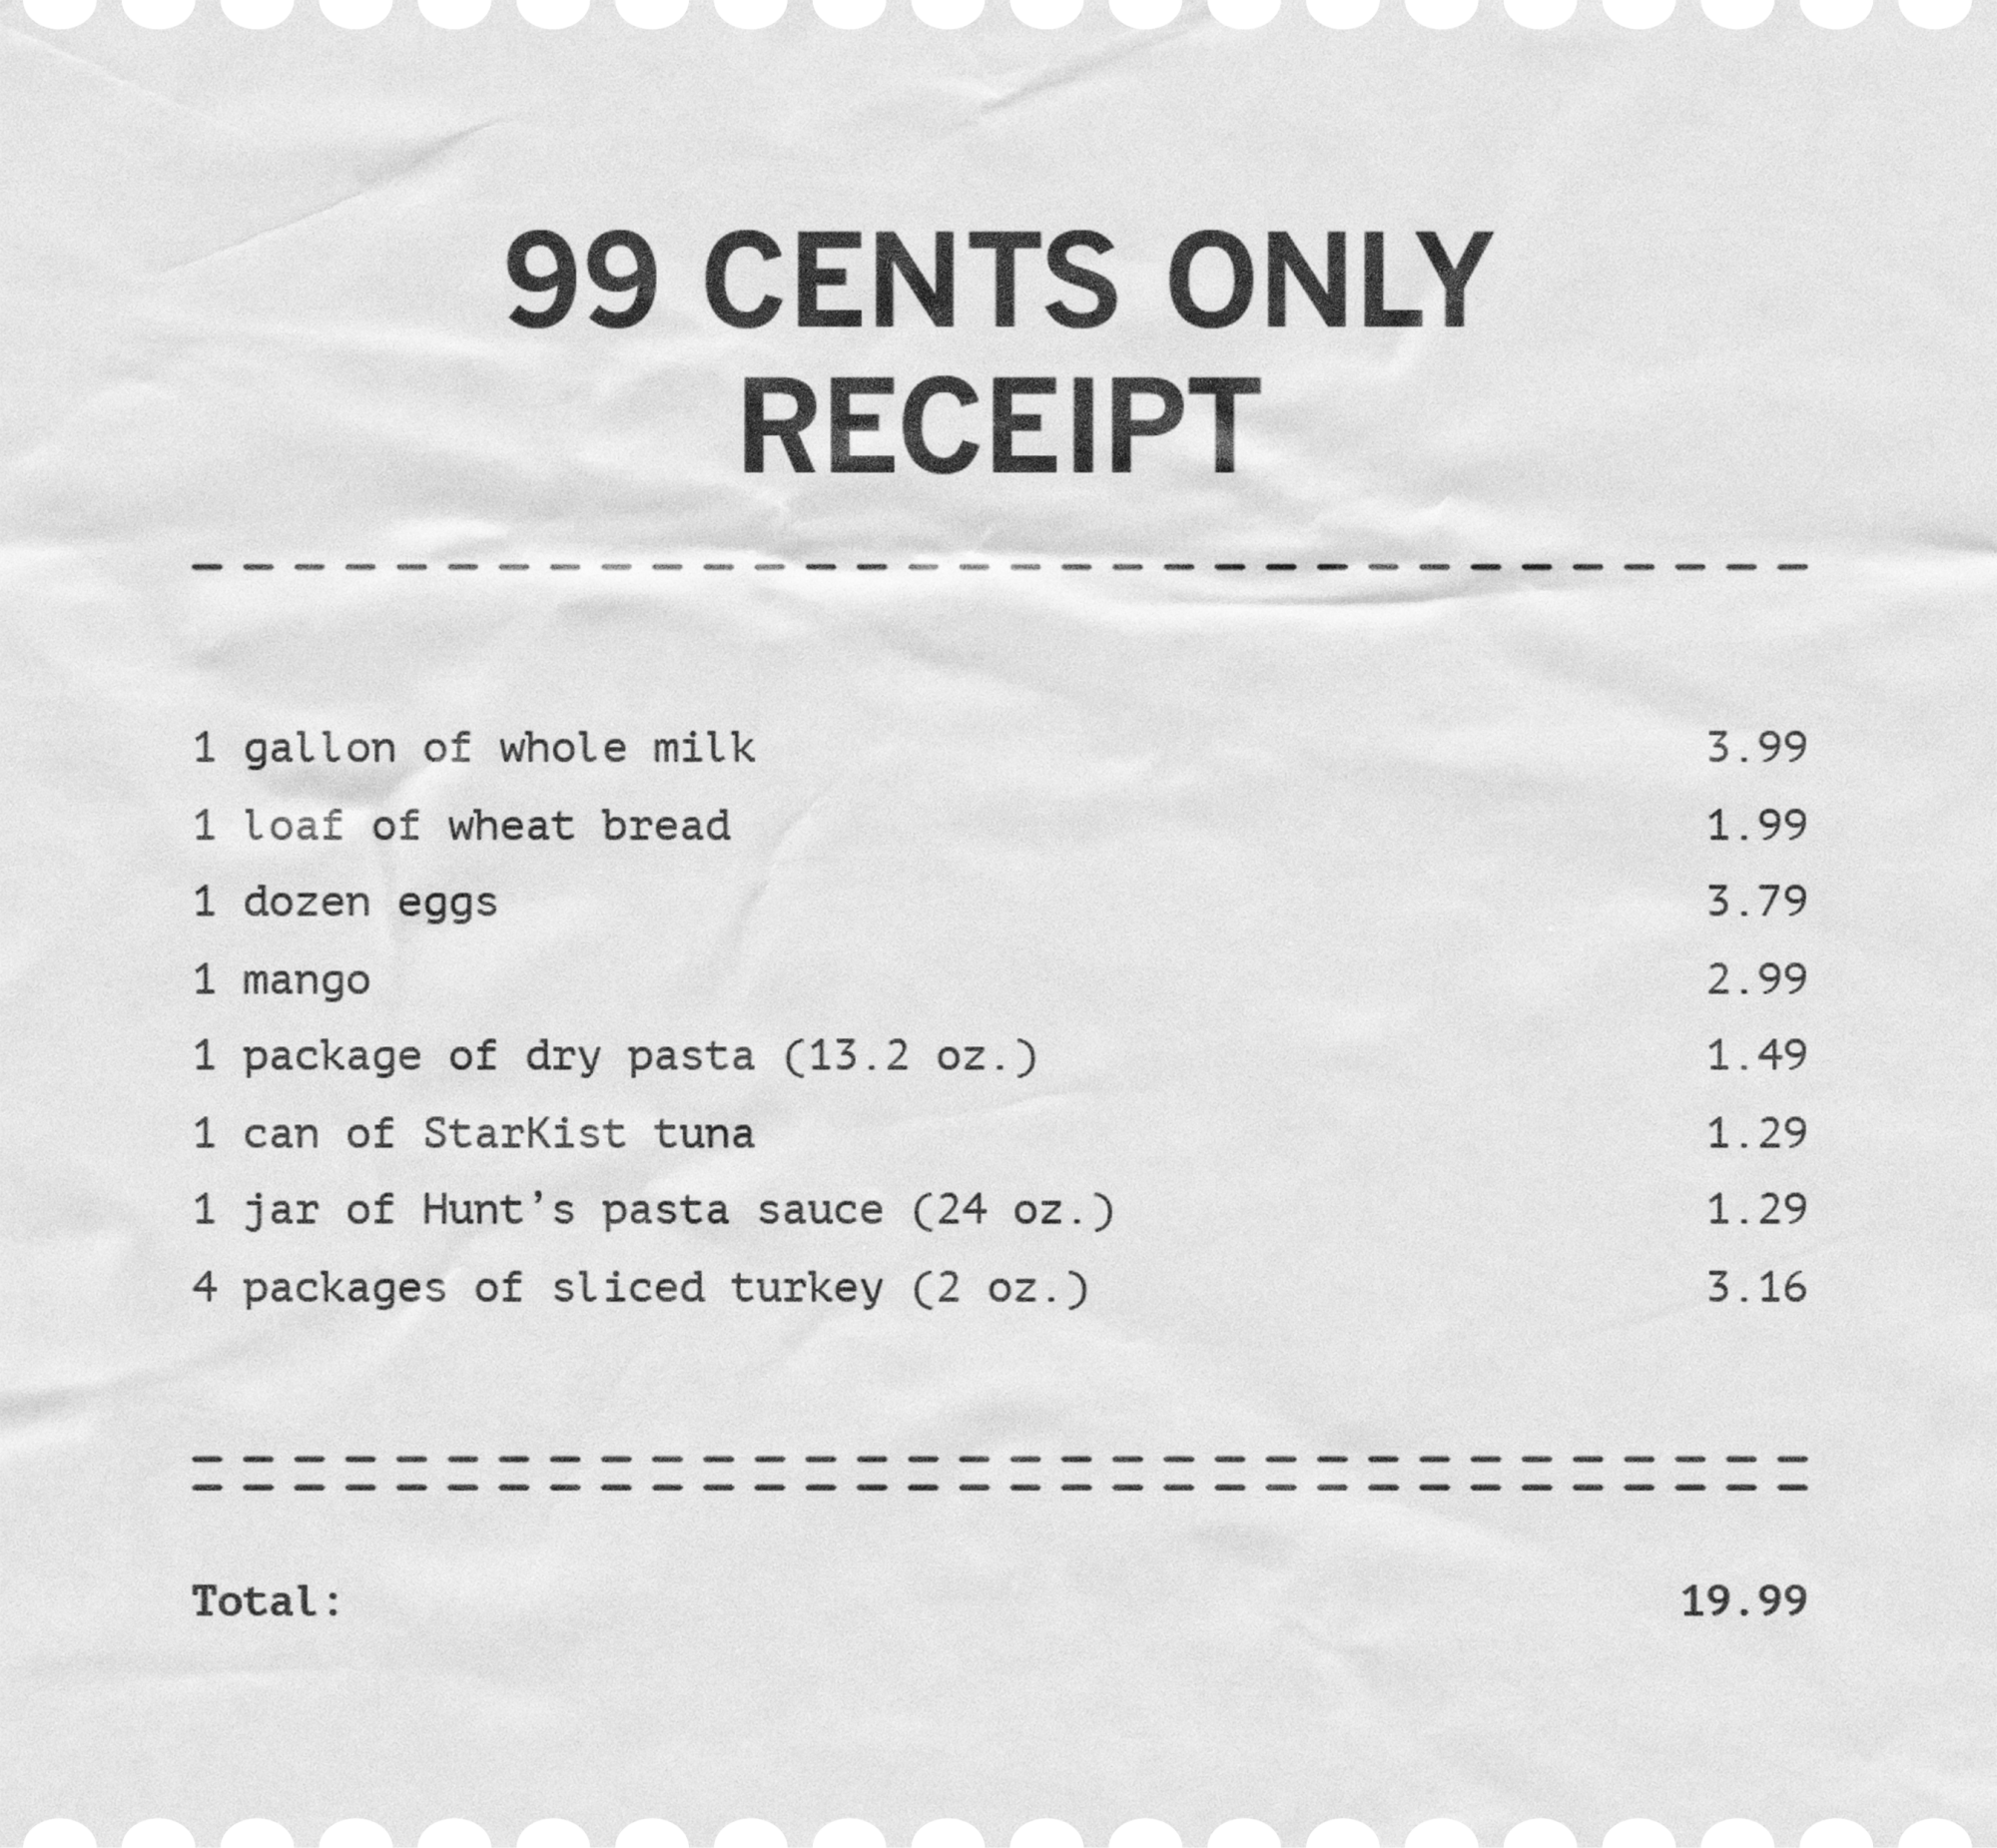 99 Cents Only receipt